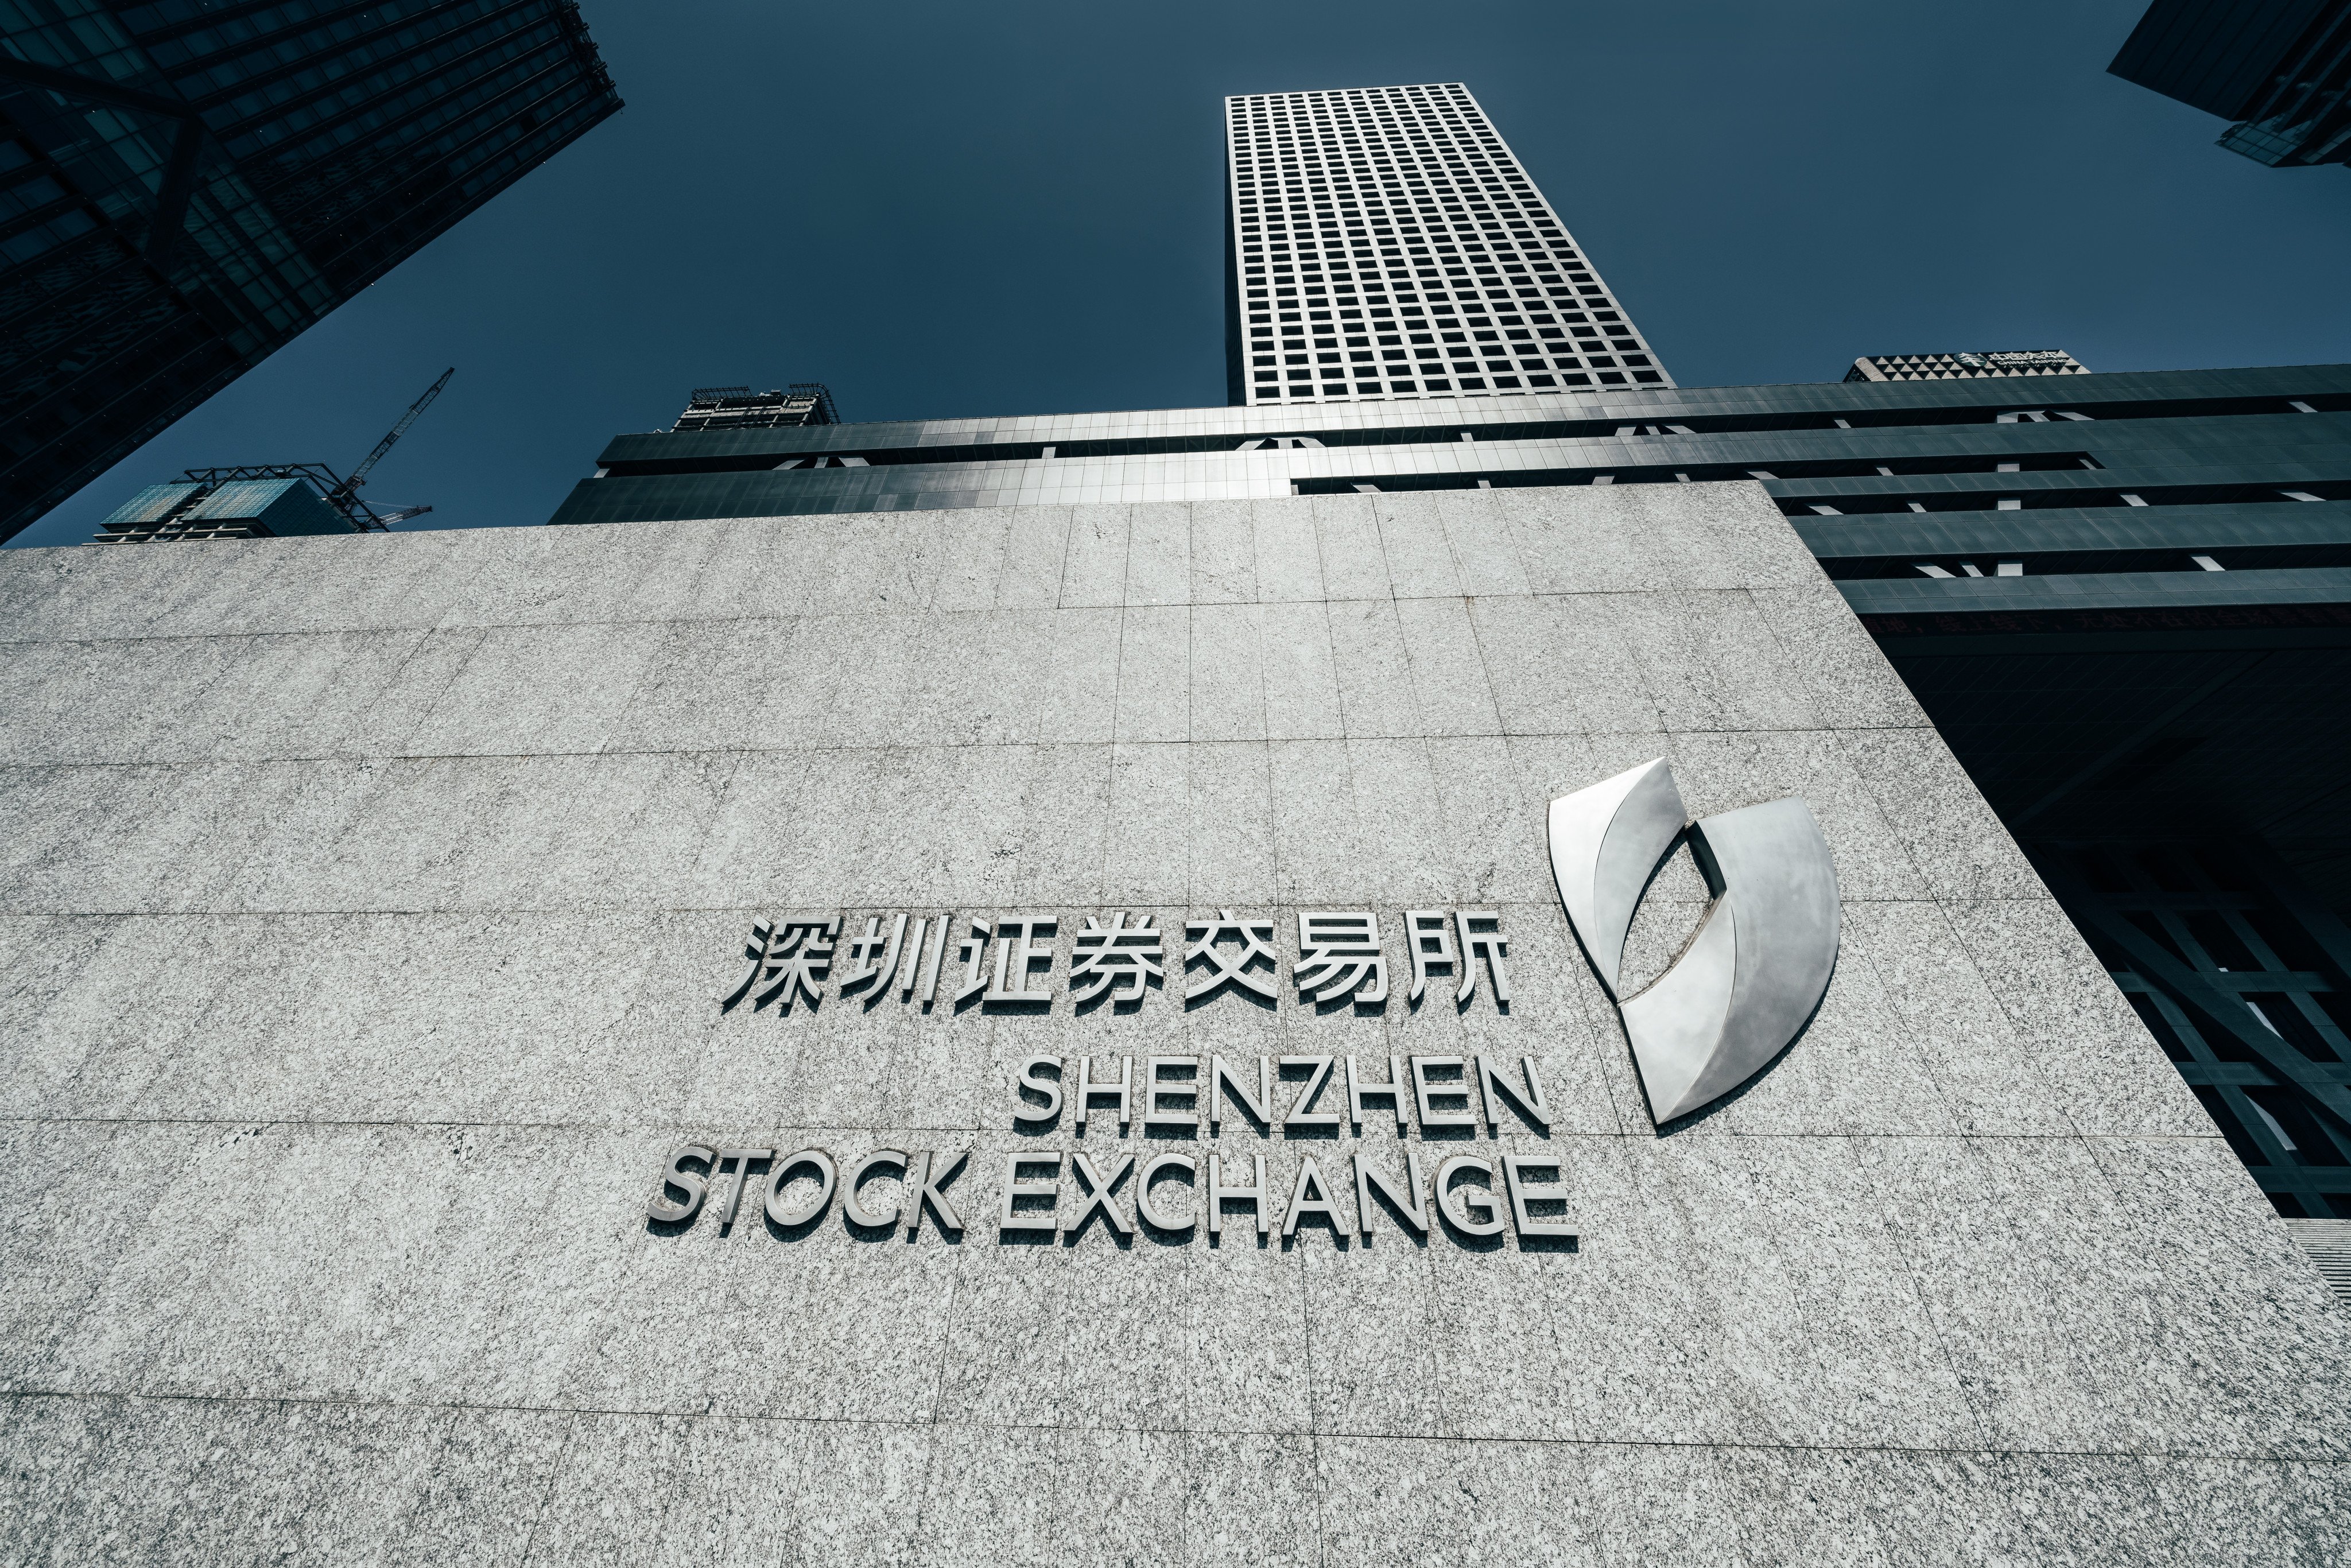 The Shenzhen and Shanghai stock exchanges have accepted zero IPO applications this year. Photo: Handout